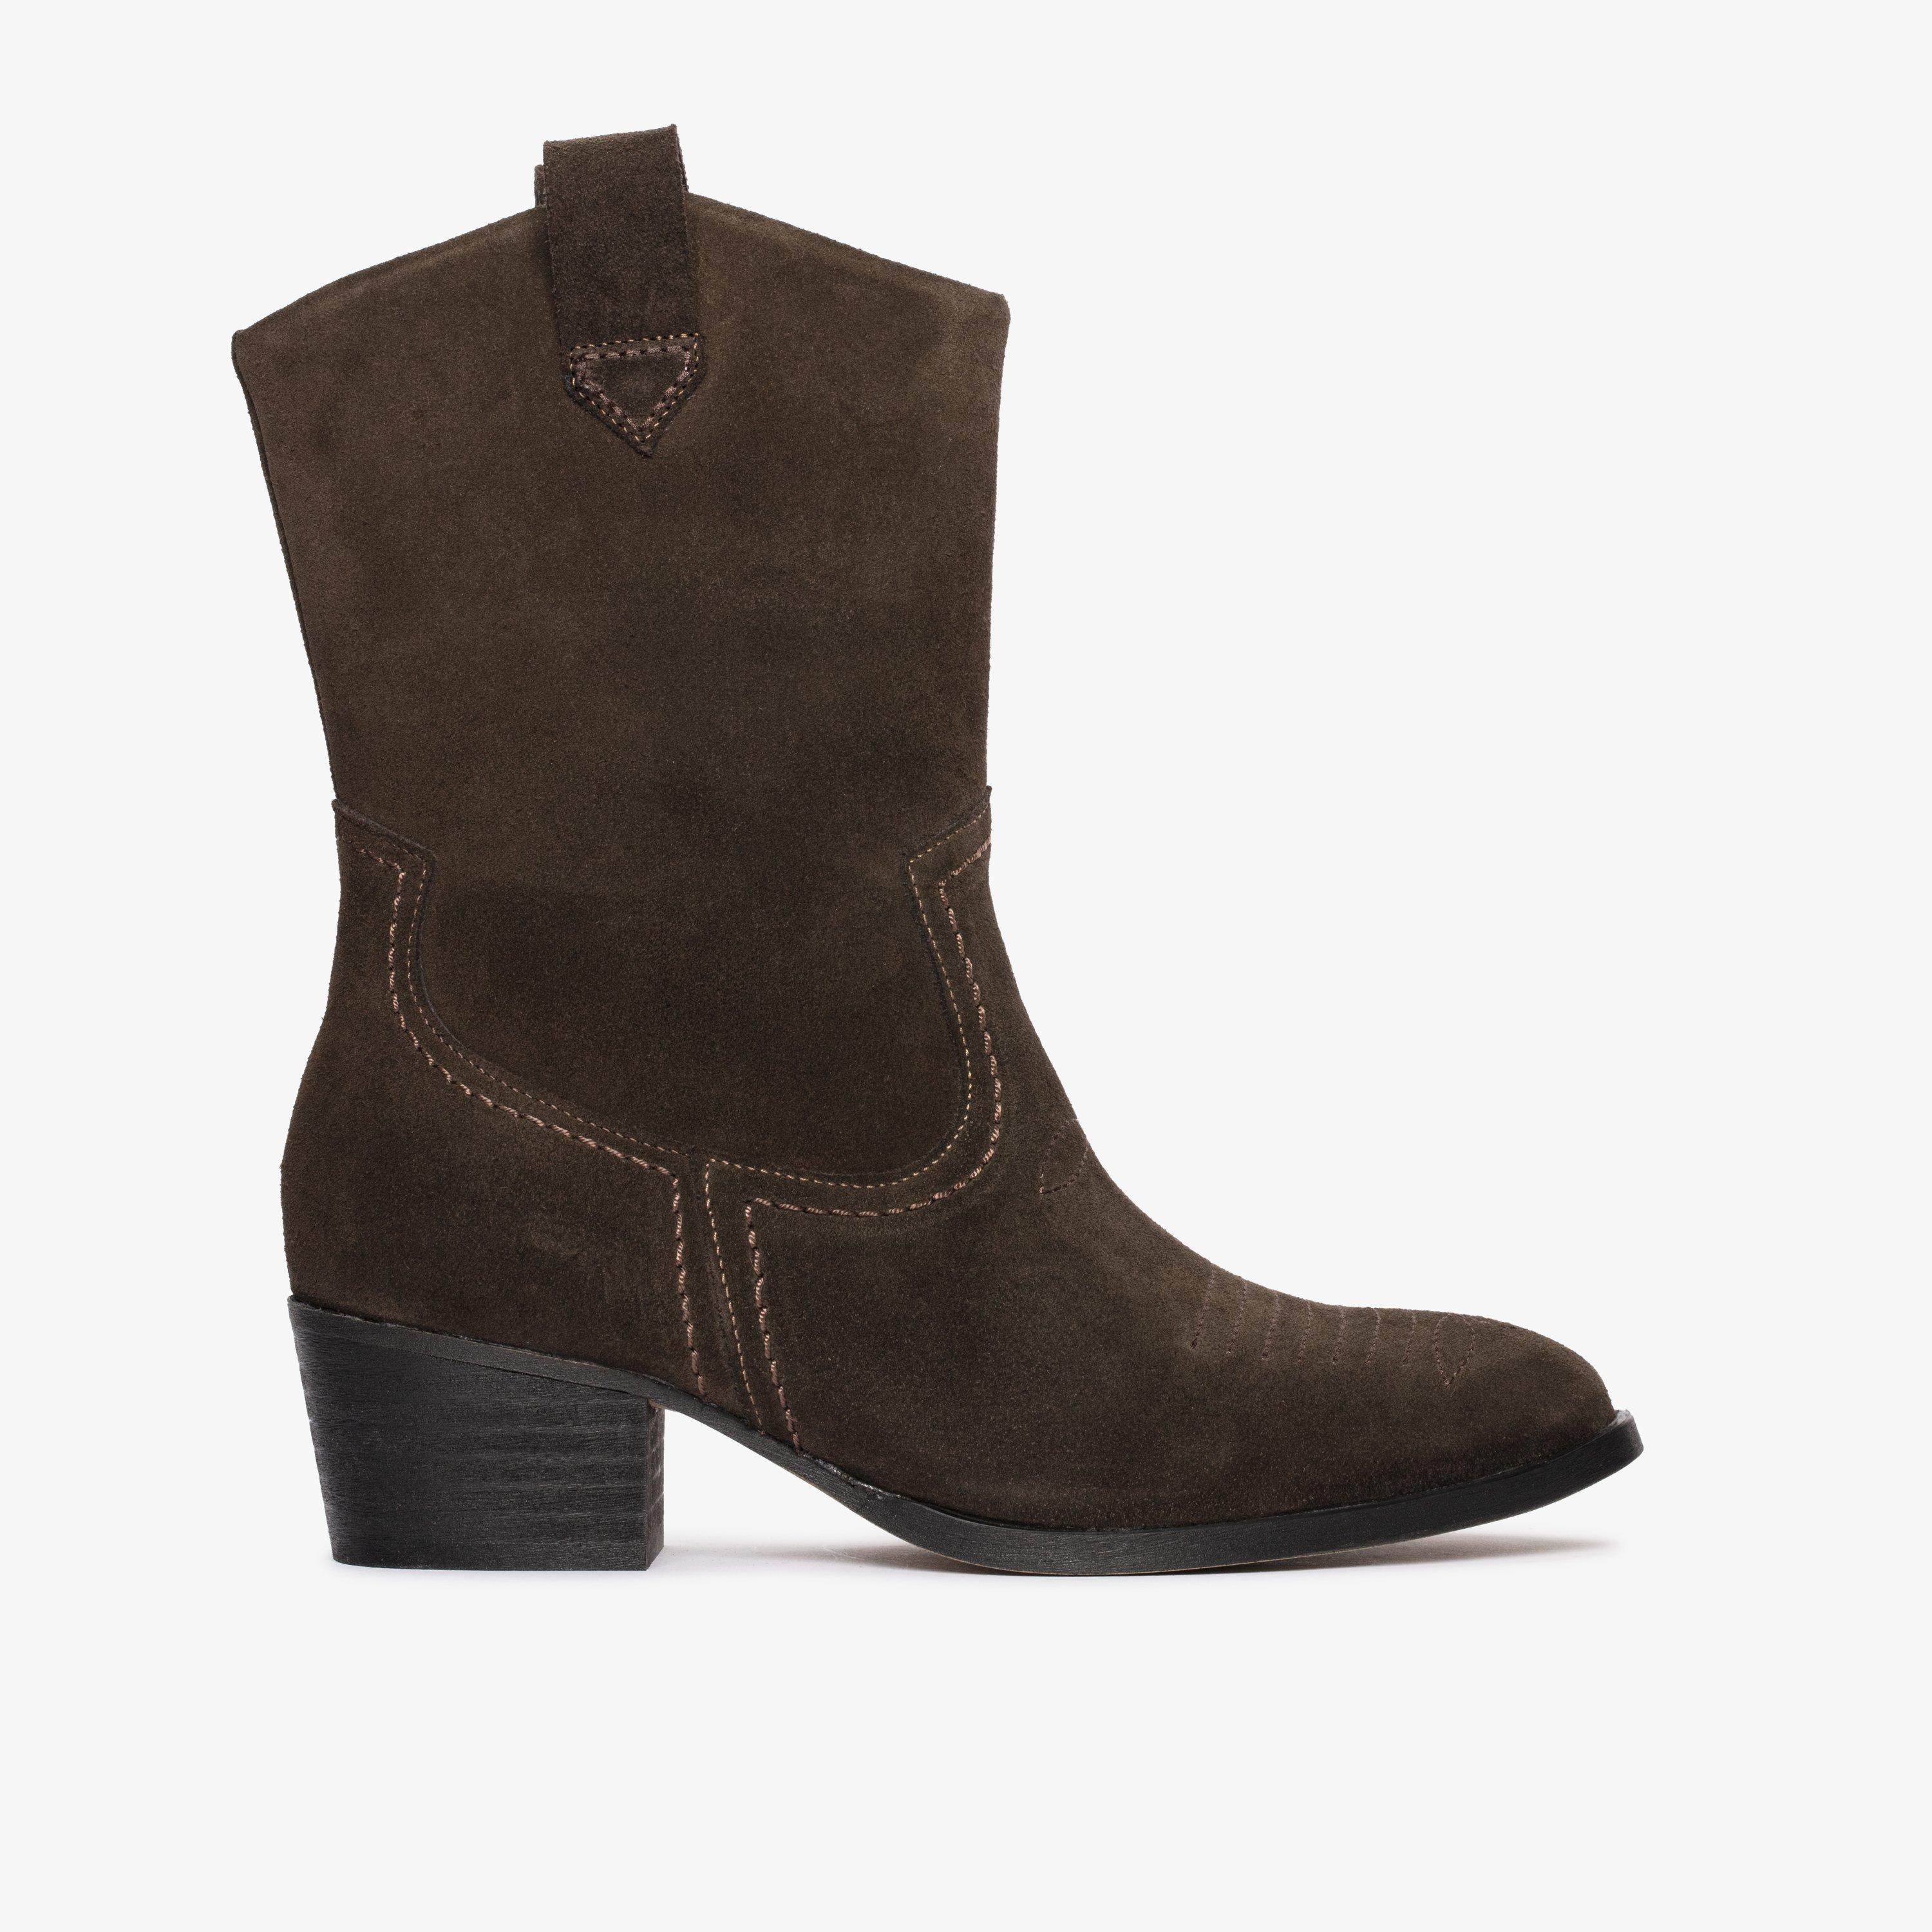 Women's Ankle Boots - Leather & Suede Ankle Boots | Clarks US